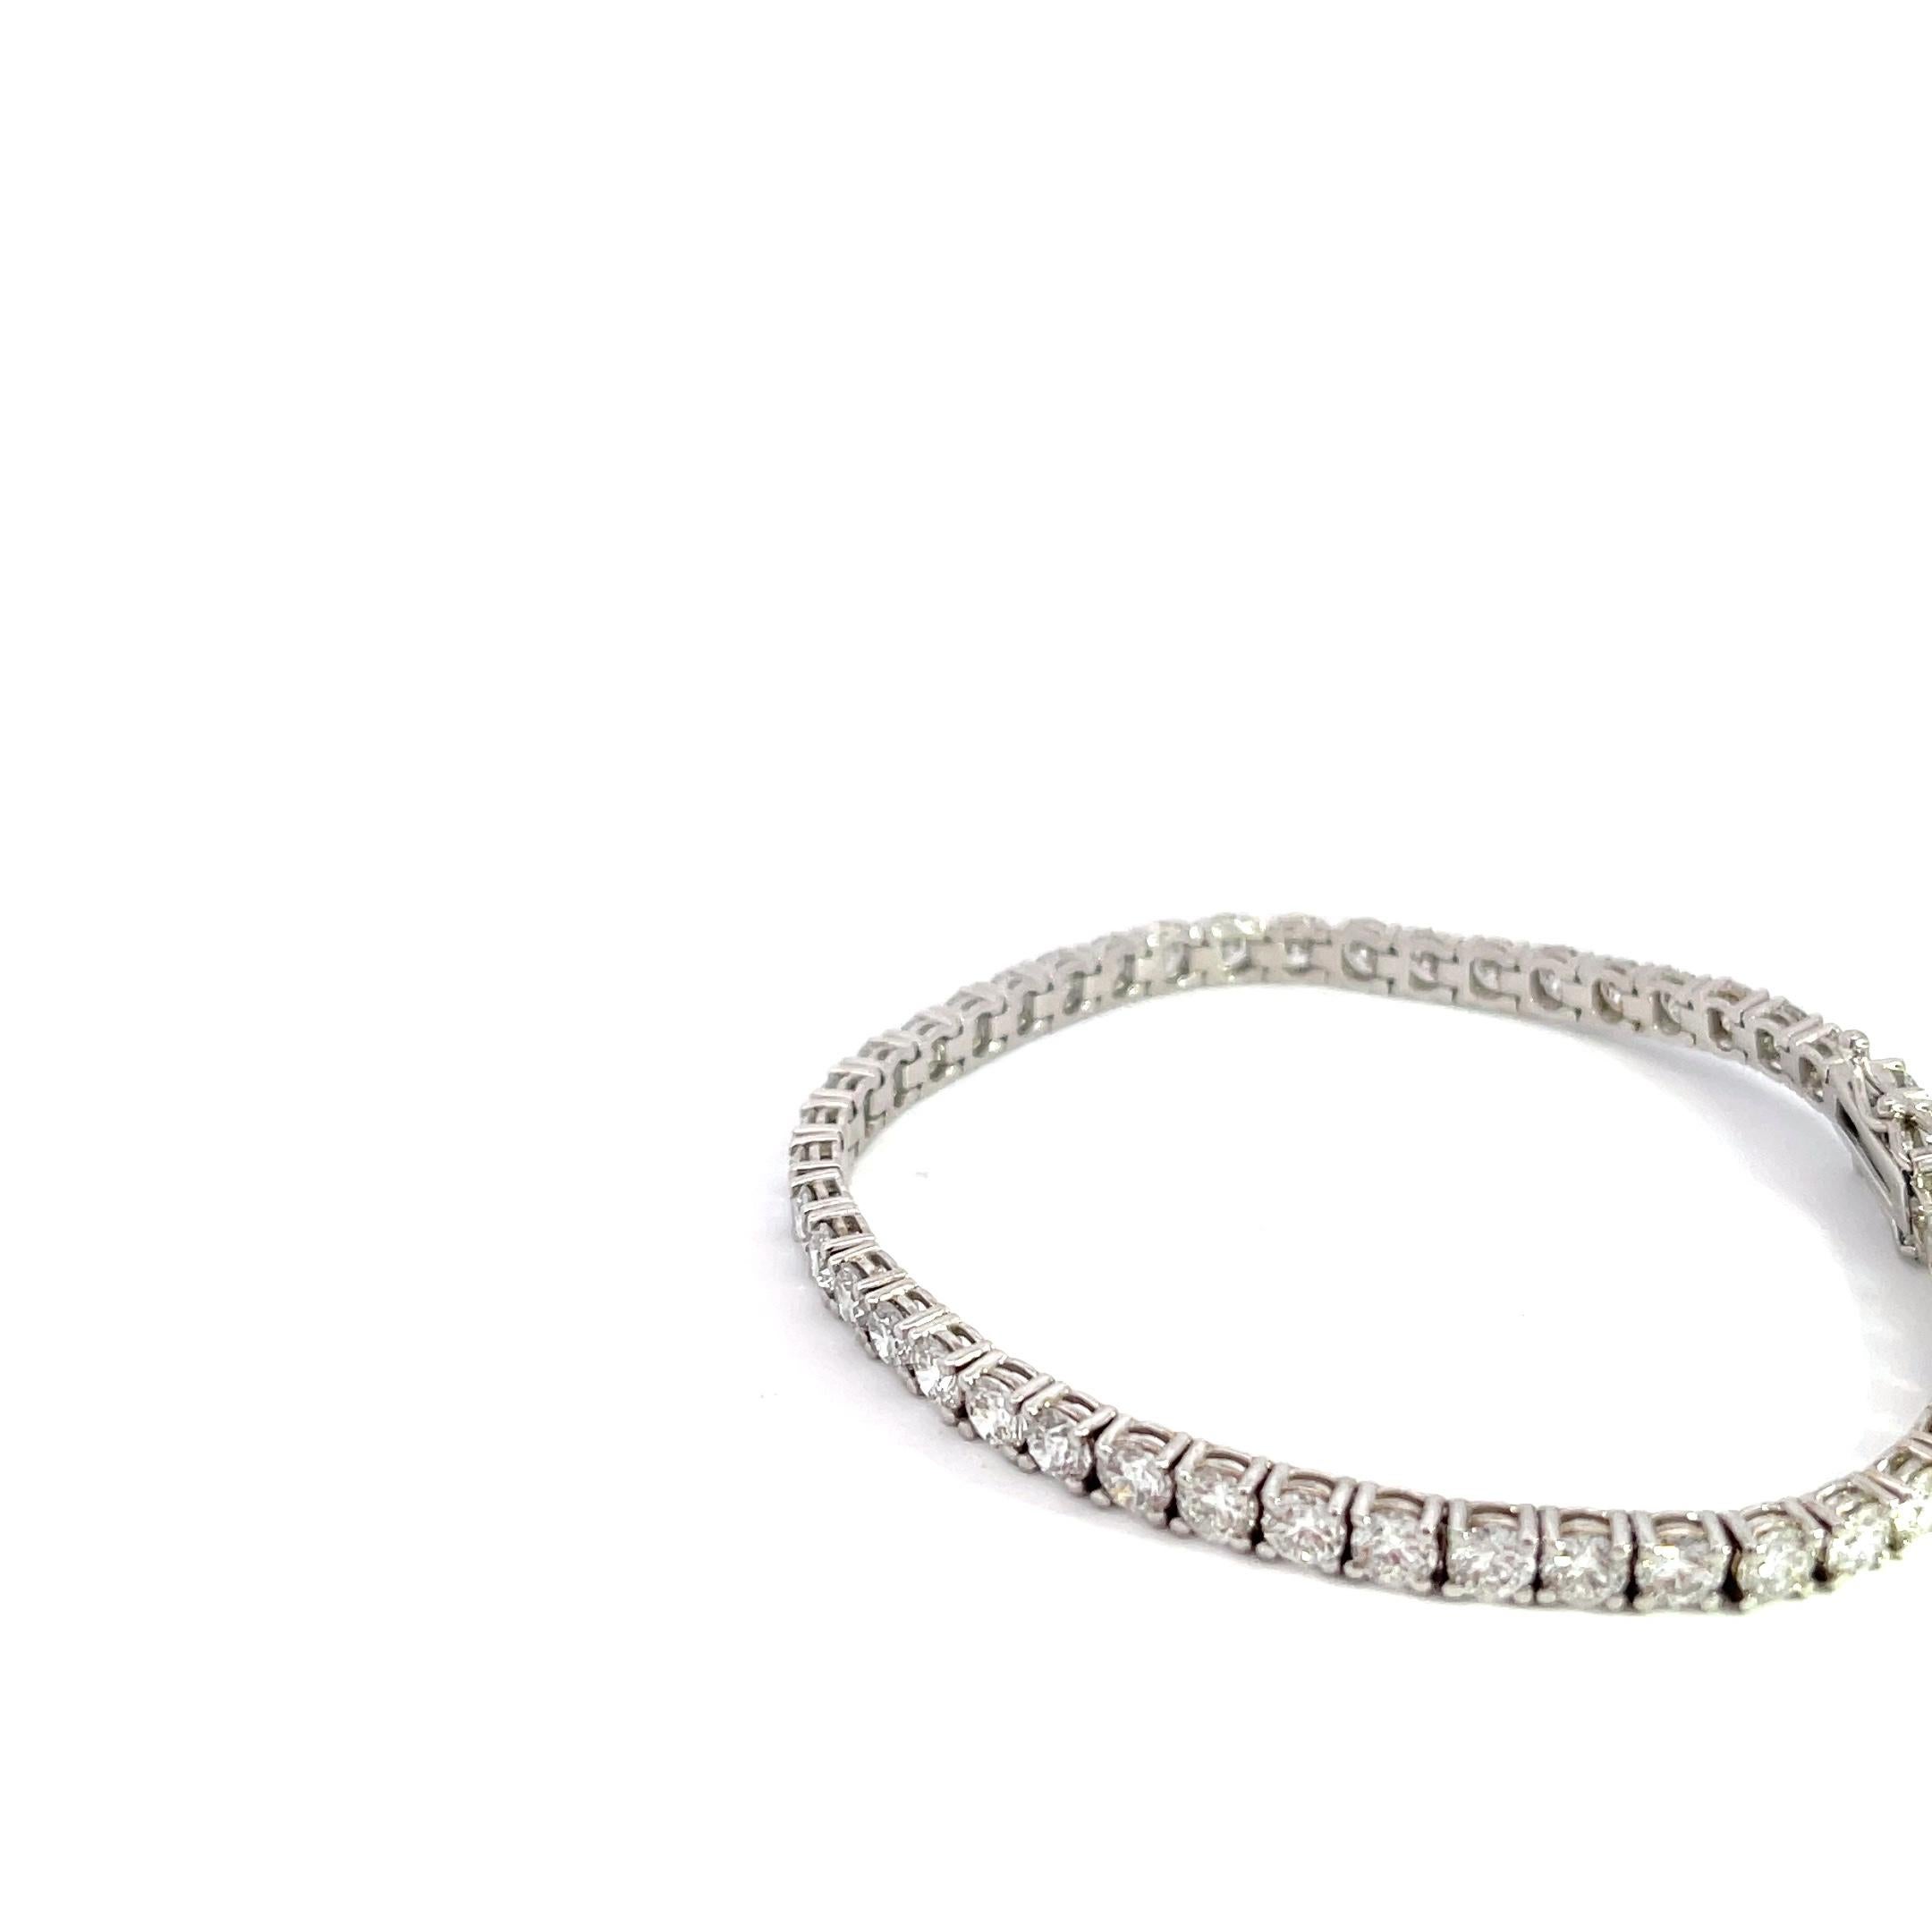 Introducing the exquisite 14k White Gold 8 1/3ctw Diamond Tennis Bracelet, a true symbol of timeless elegance and sophistication. This dazzling masterpiece is a must-have for those seeking to make a stunning statement. Crafted with meticulous